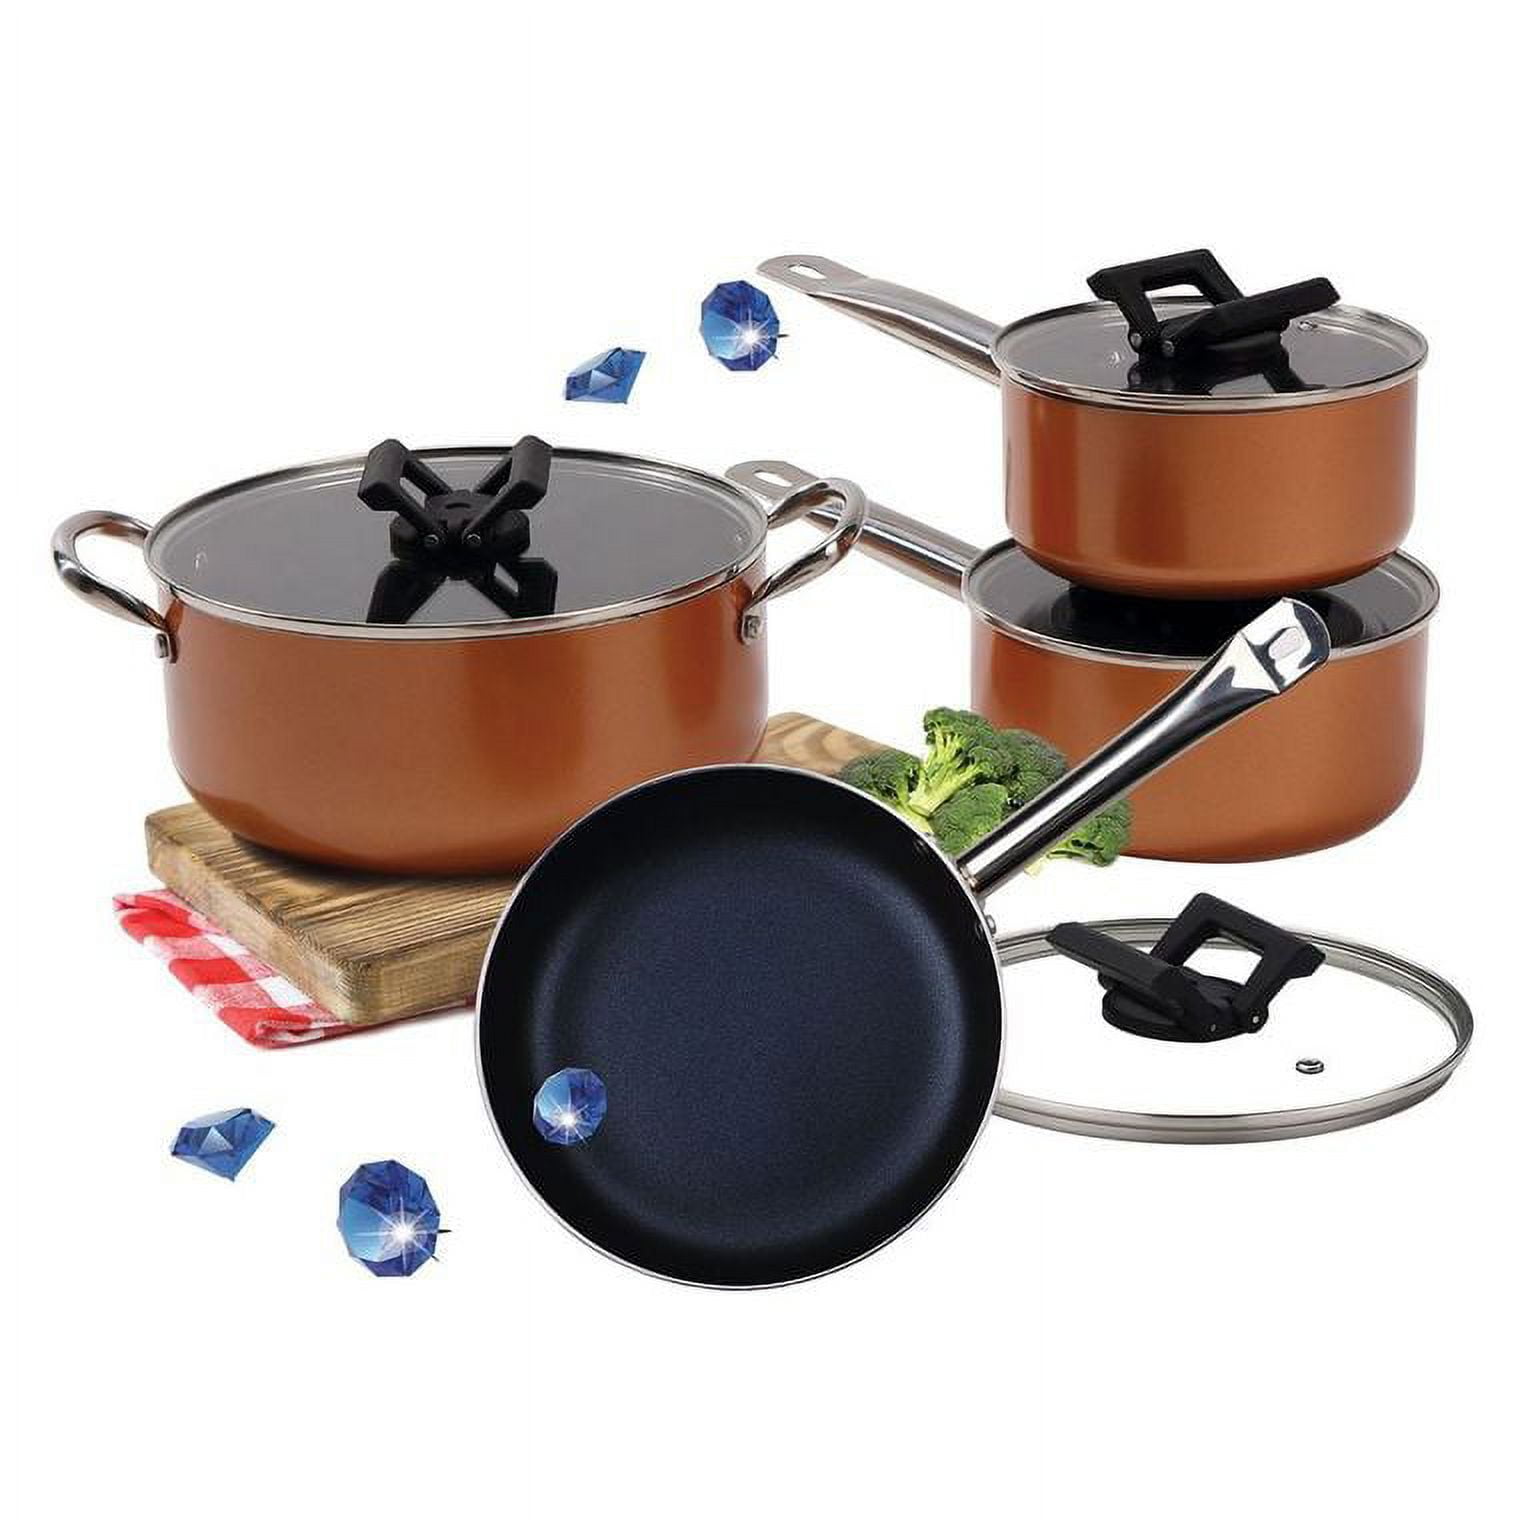 Gourmet Edge - Non-Stick Stainless Steel Stock Pot with Lid #20